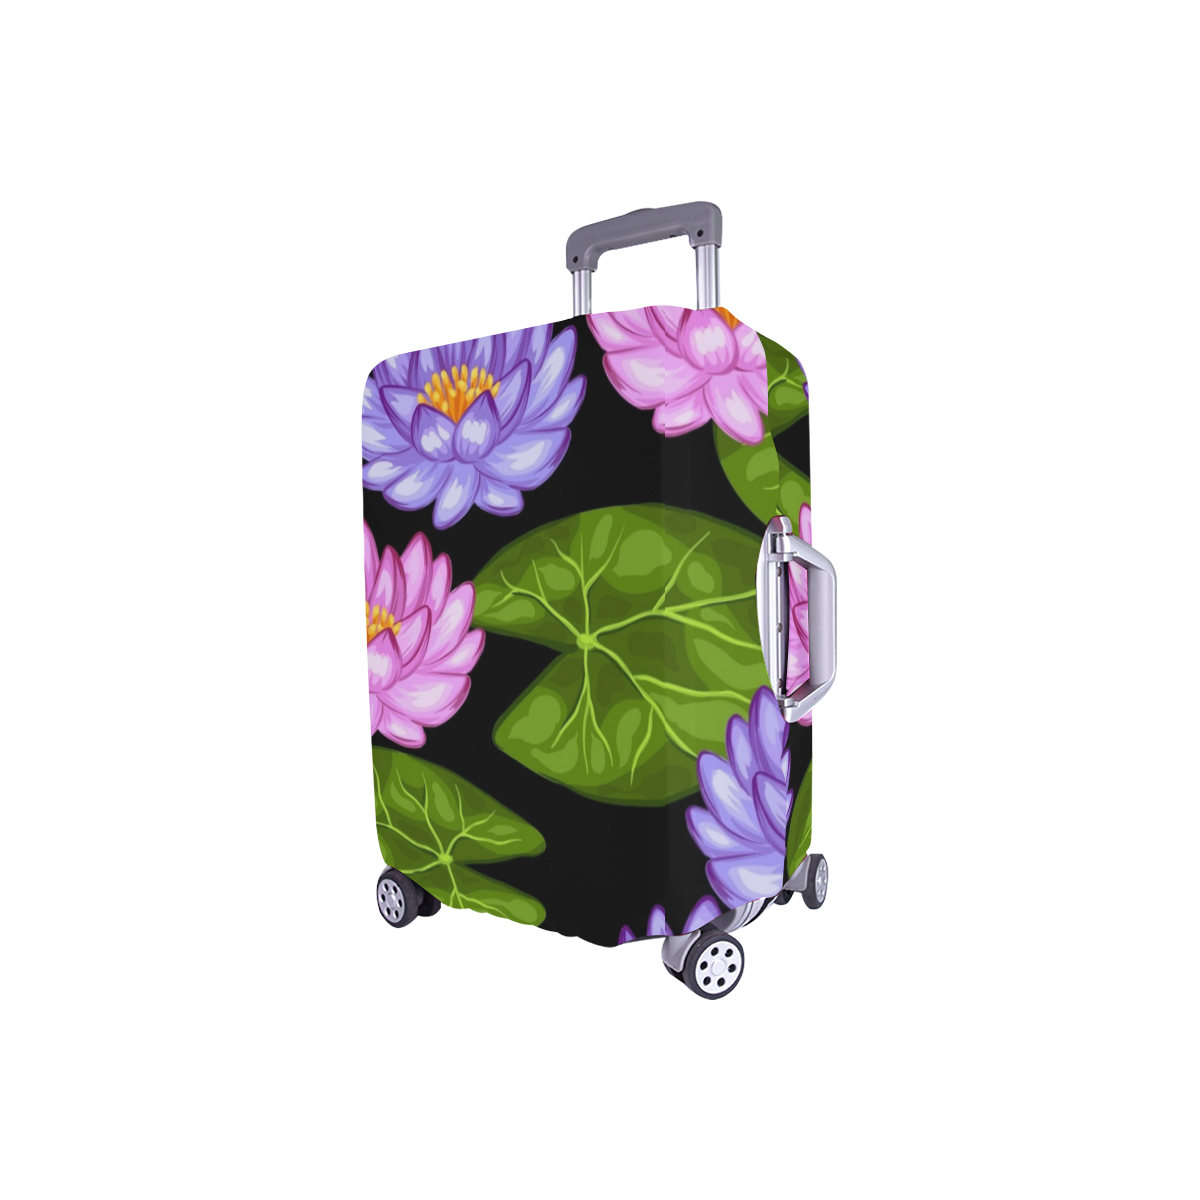 Lotus Luggage Cover Luggage Cover/Small 18"-21"